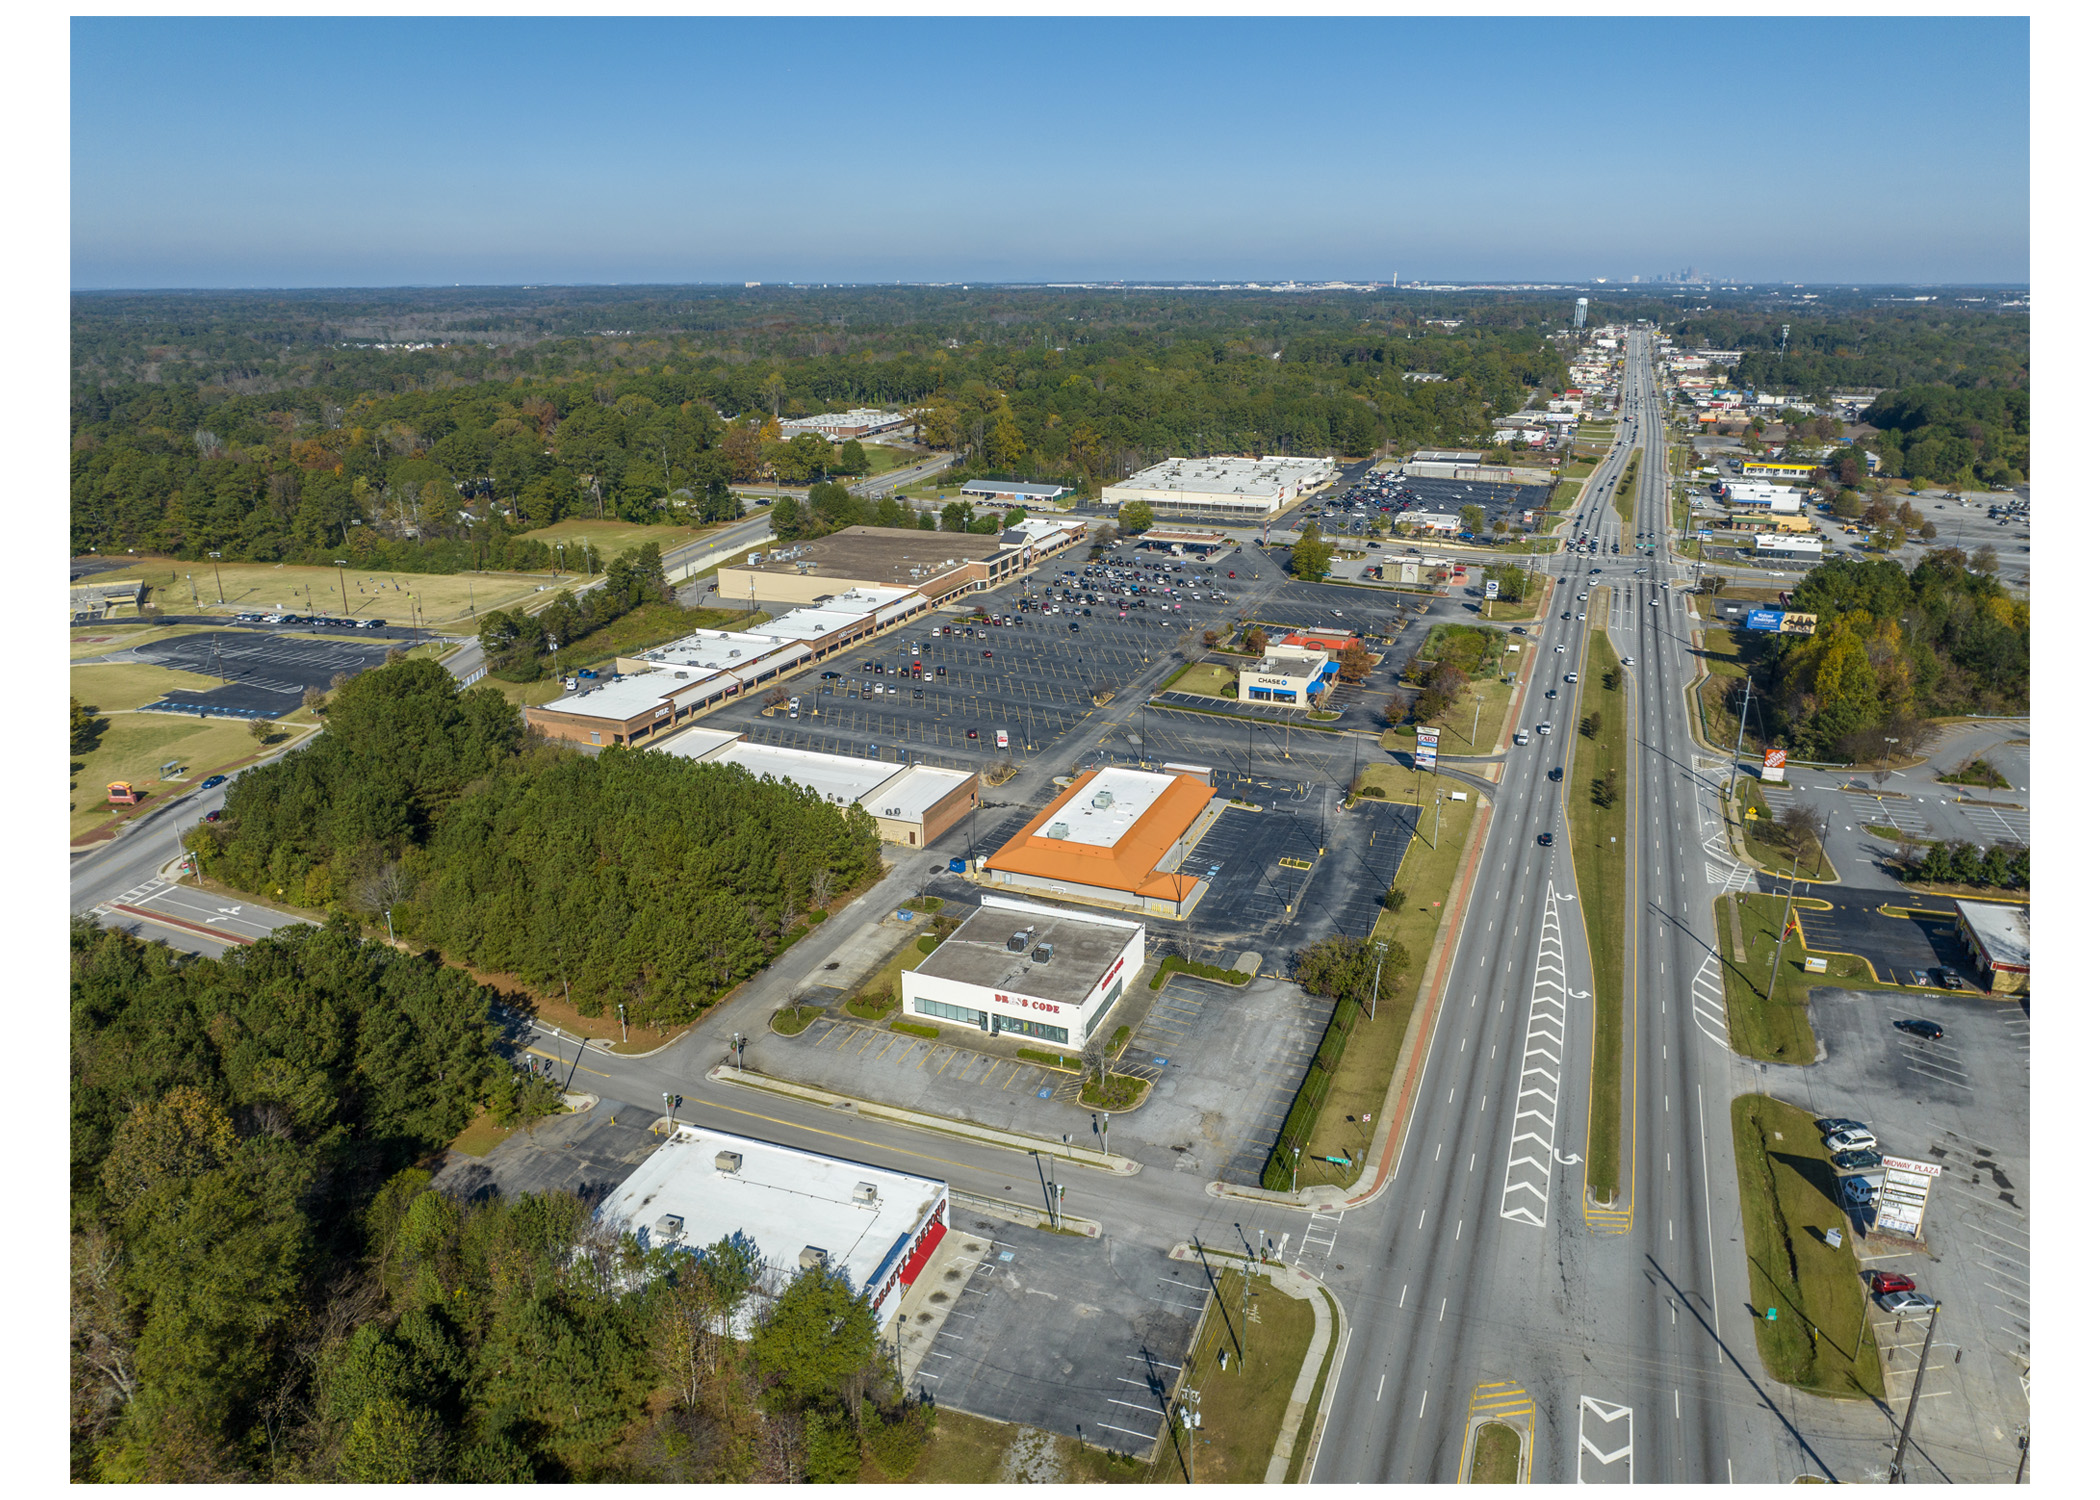 Merchants Square, route 85, Kroger, parking lot, and Chase Bank, aerial view.